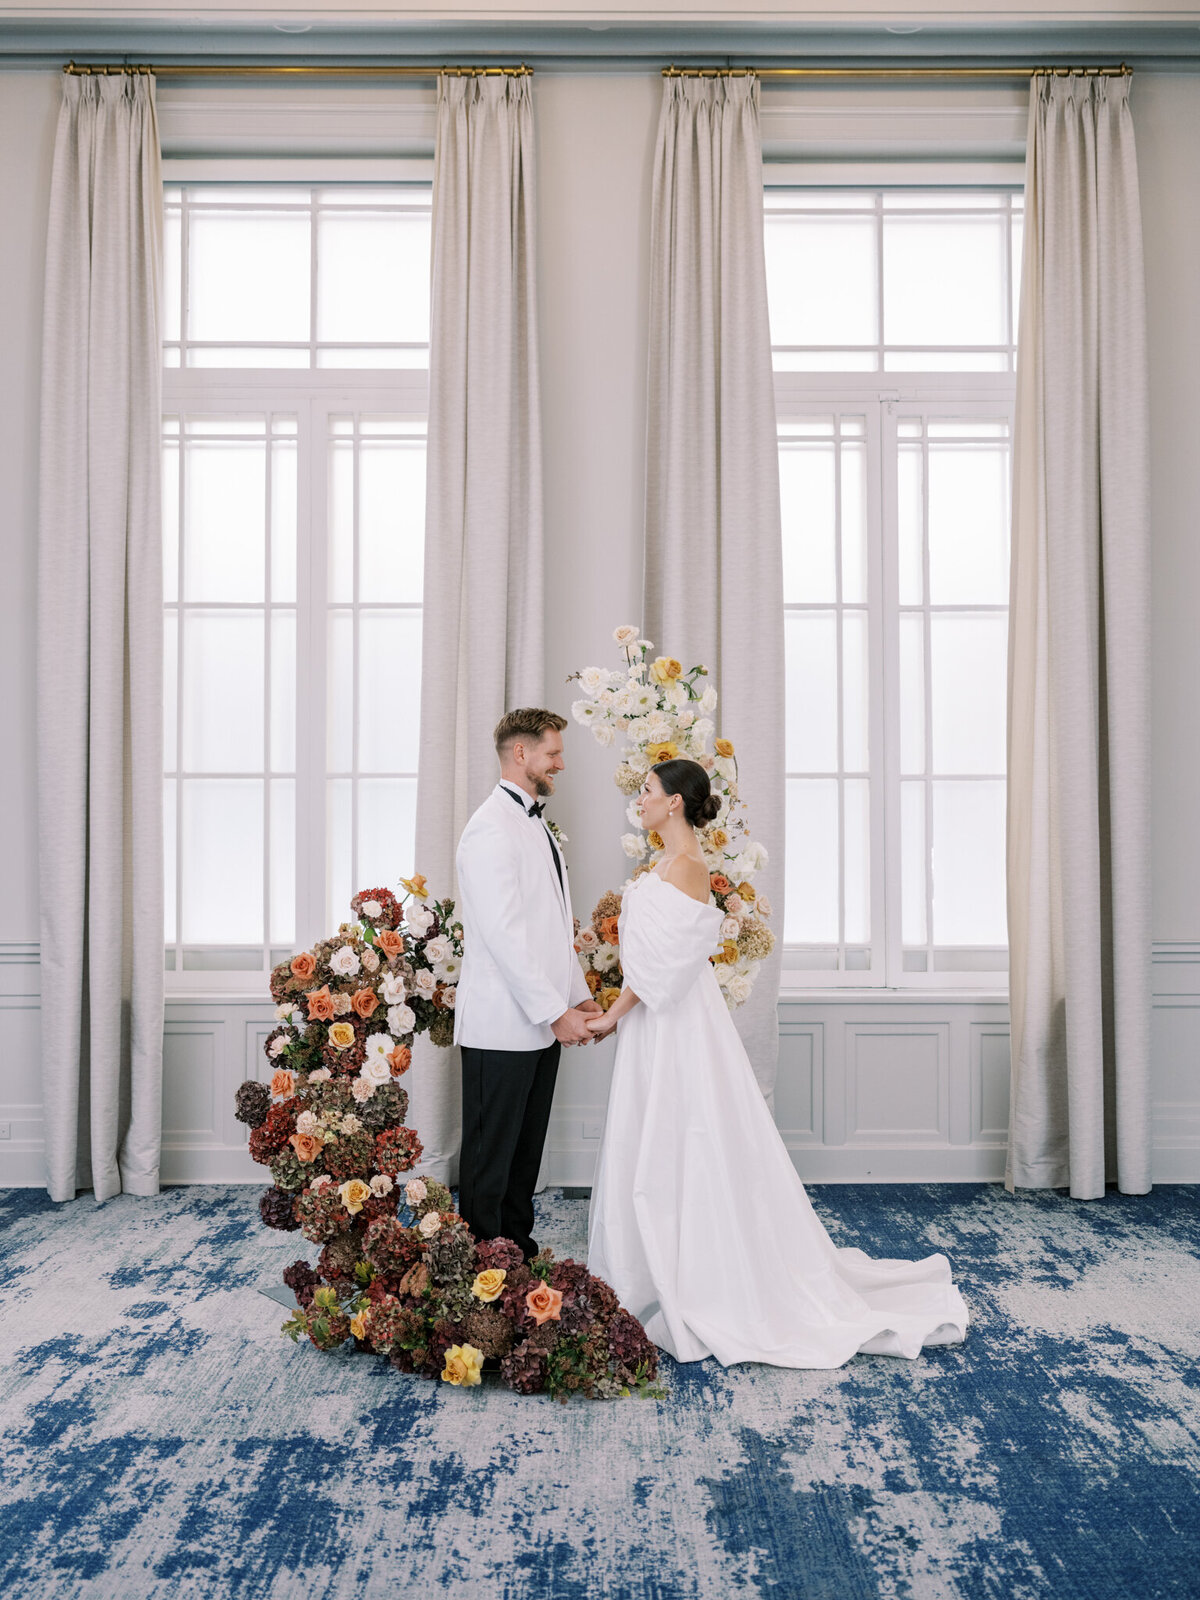 Beautiful and elegant couple during ceremony at the Fairmont Palliser in Calgary, AB. Featured on the Bronte Bride Vendor Guide.